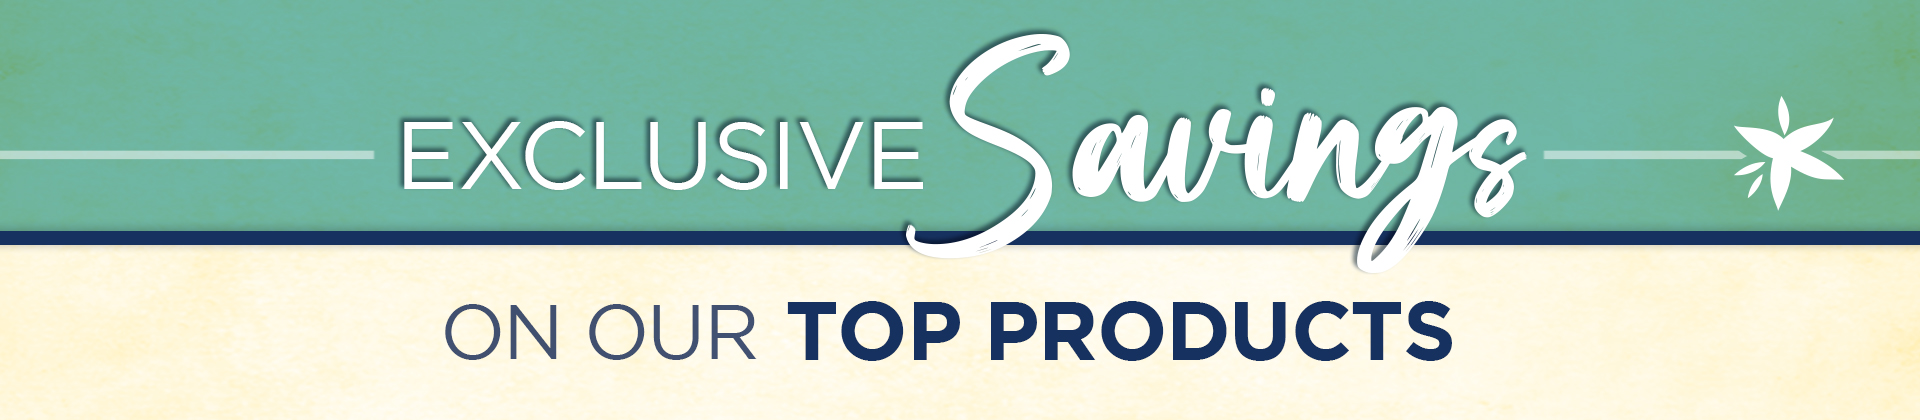 Top Products Sale at Apria Direct